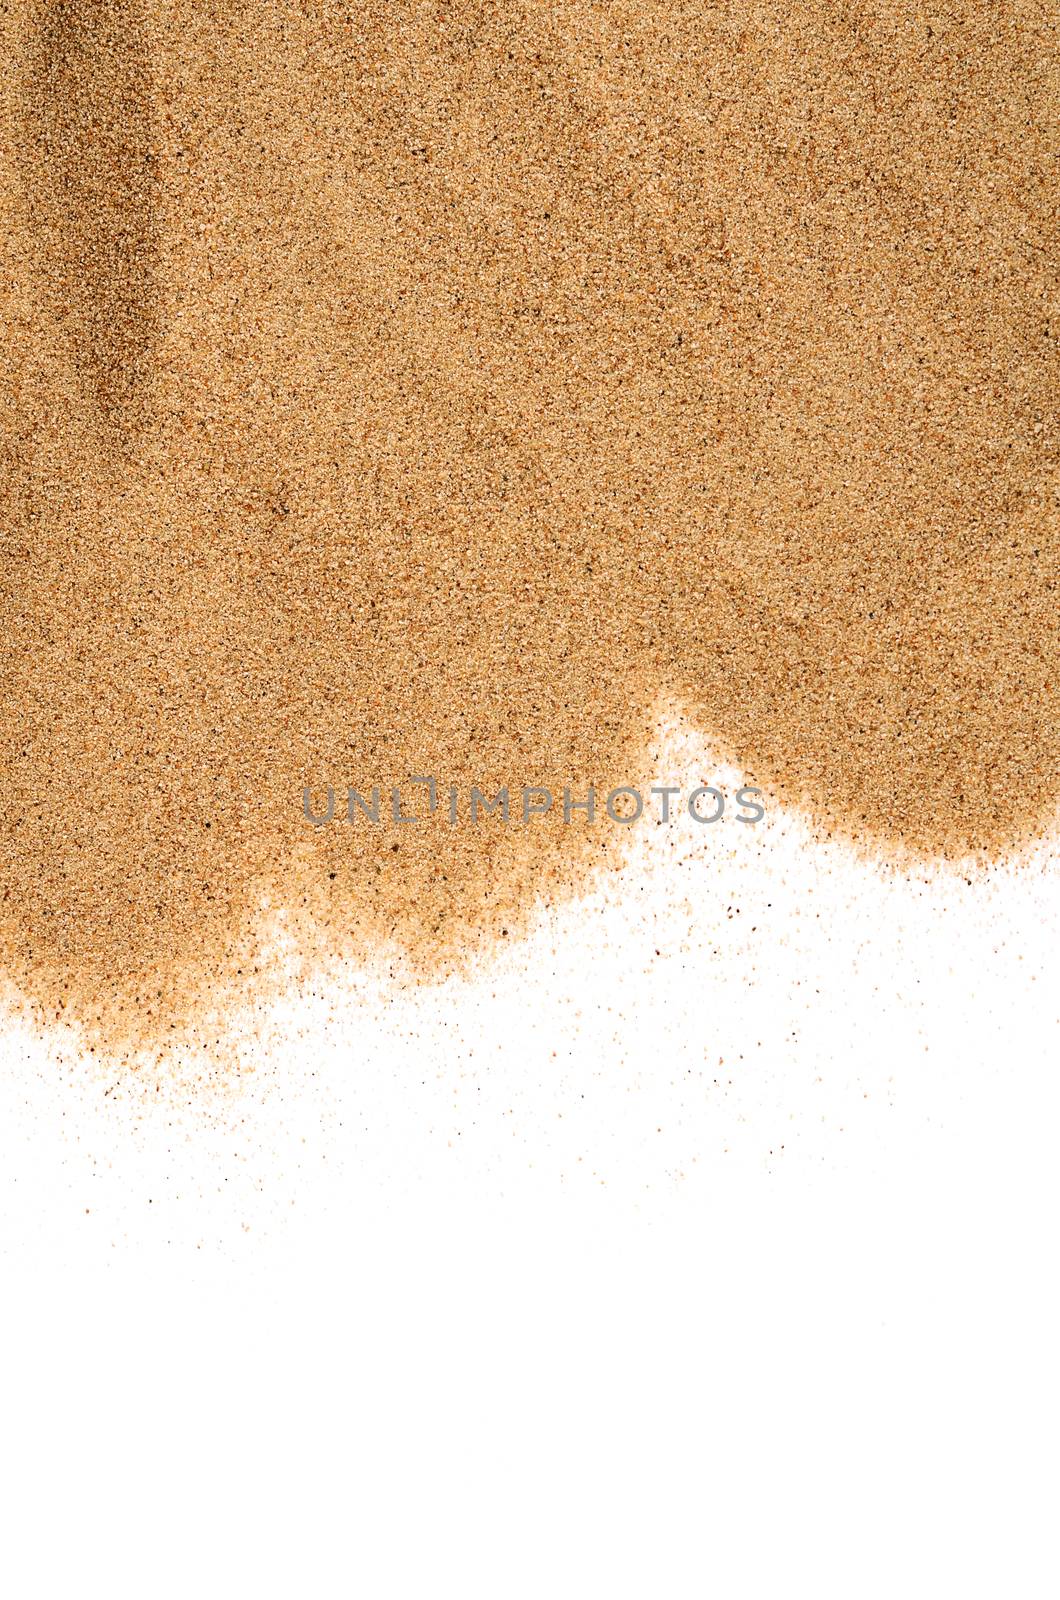 The sand isolated on white background close-up